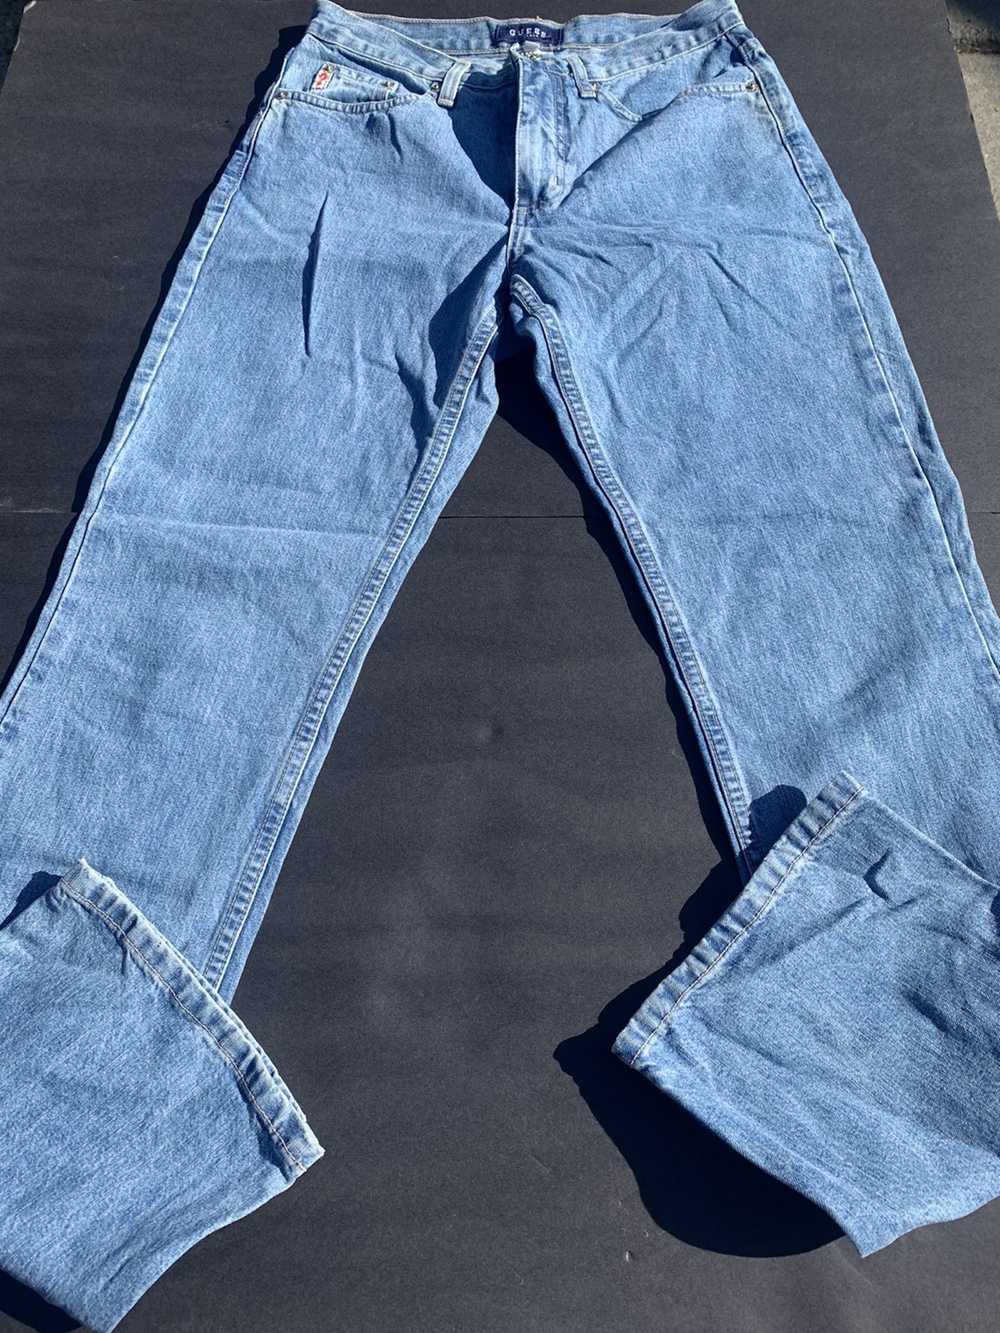 Guess Vintage guess denim jeans 90s made in USA - image 2